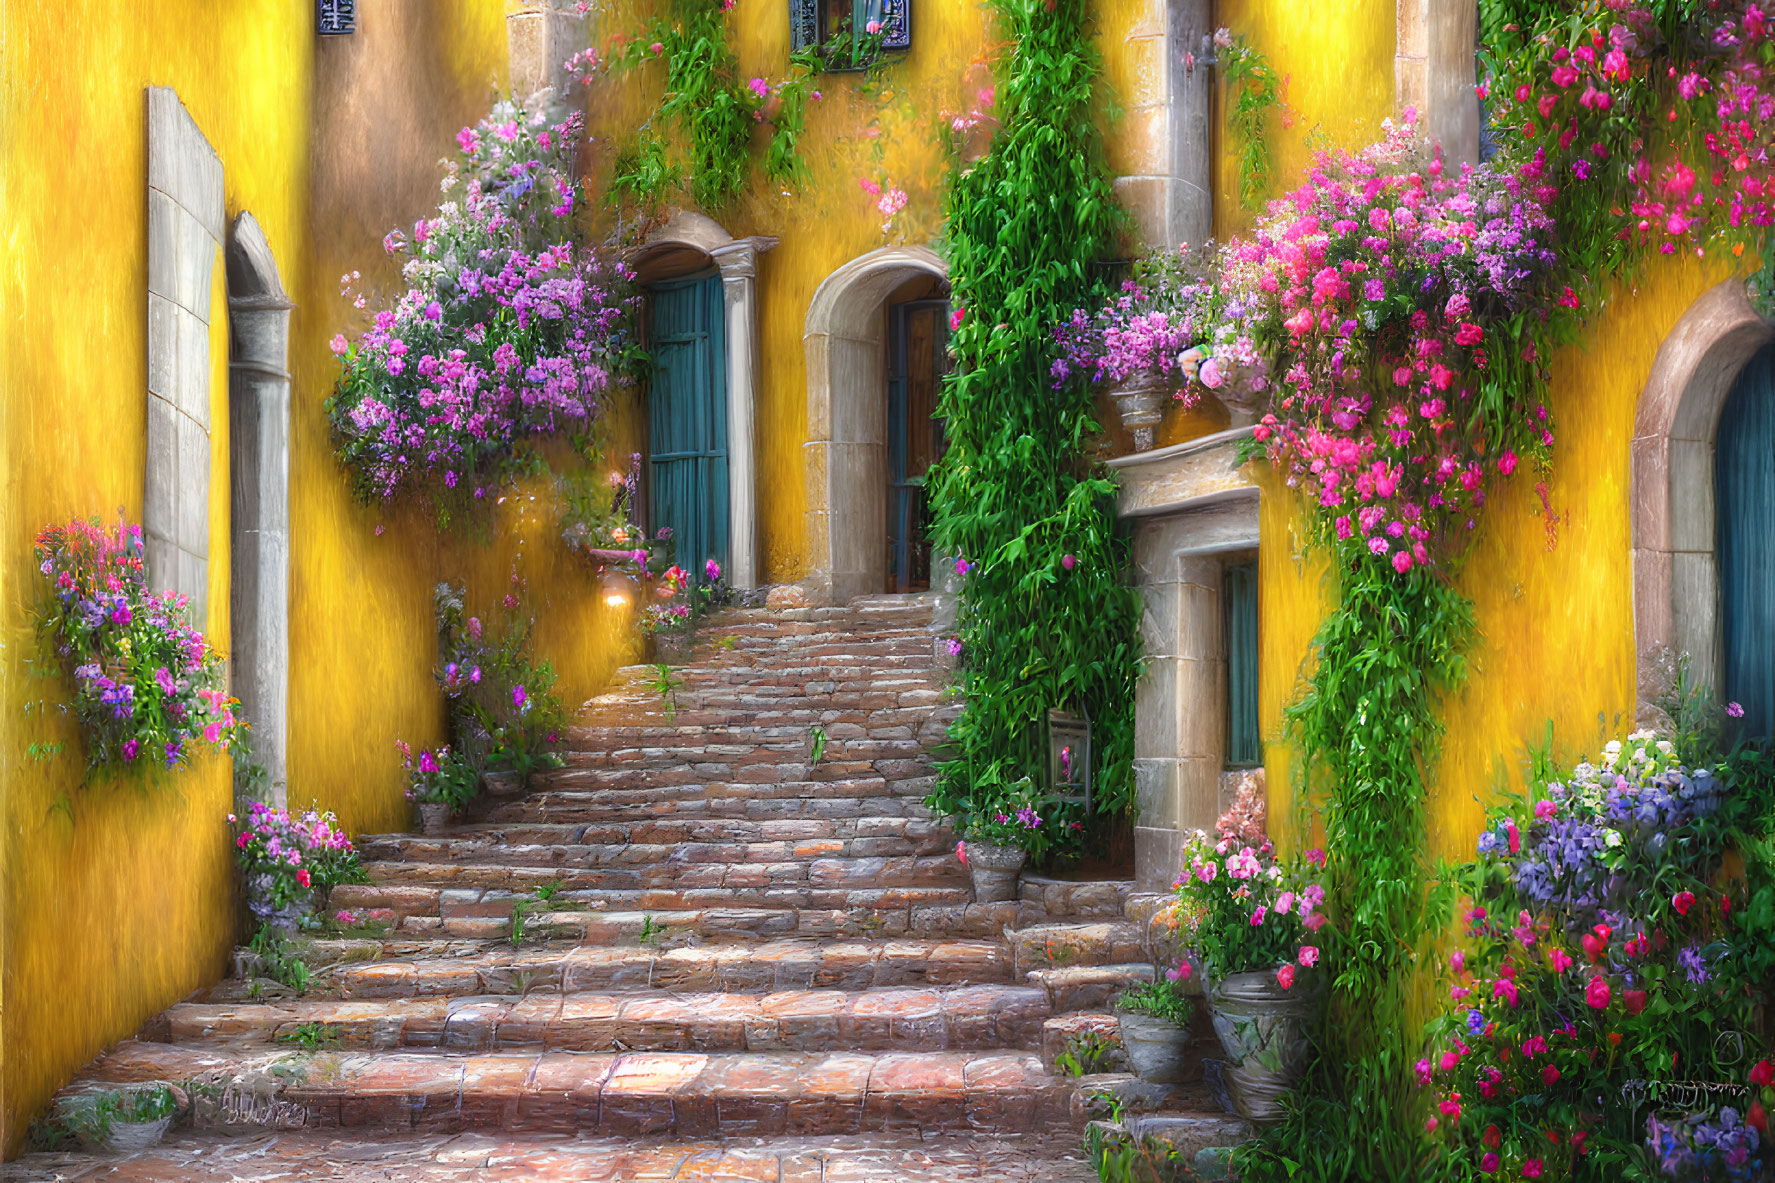 Cobblestone Staircase with Bougainvillea and Yellow Walls